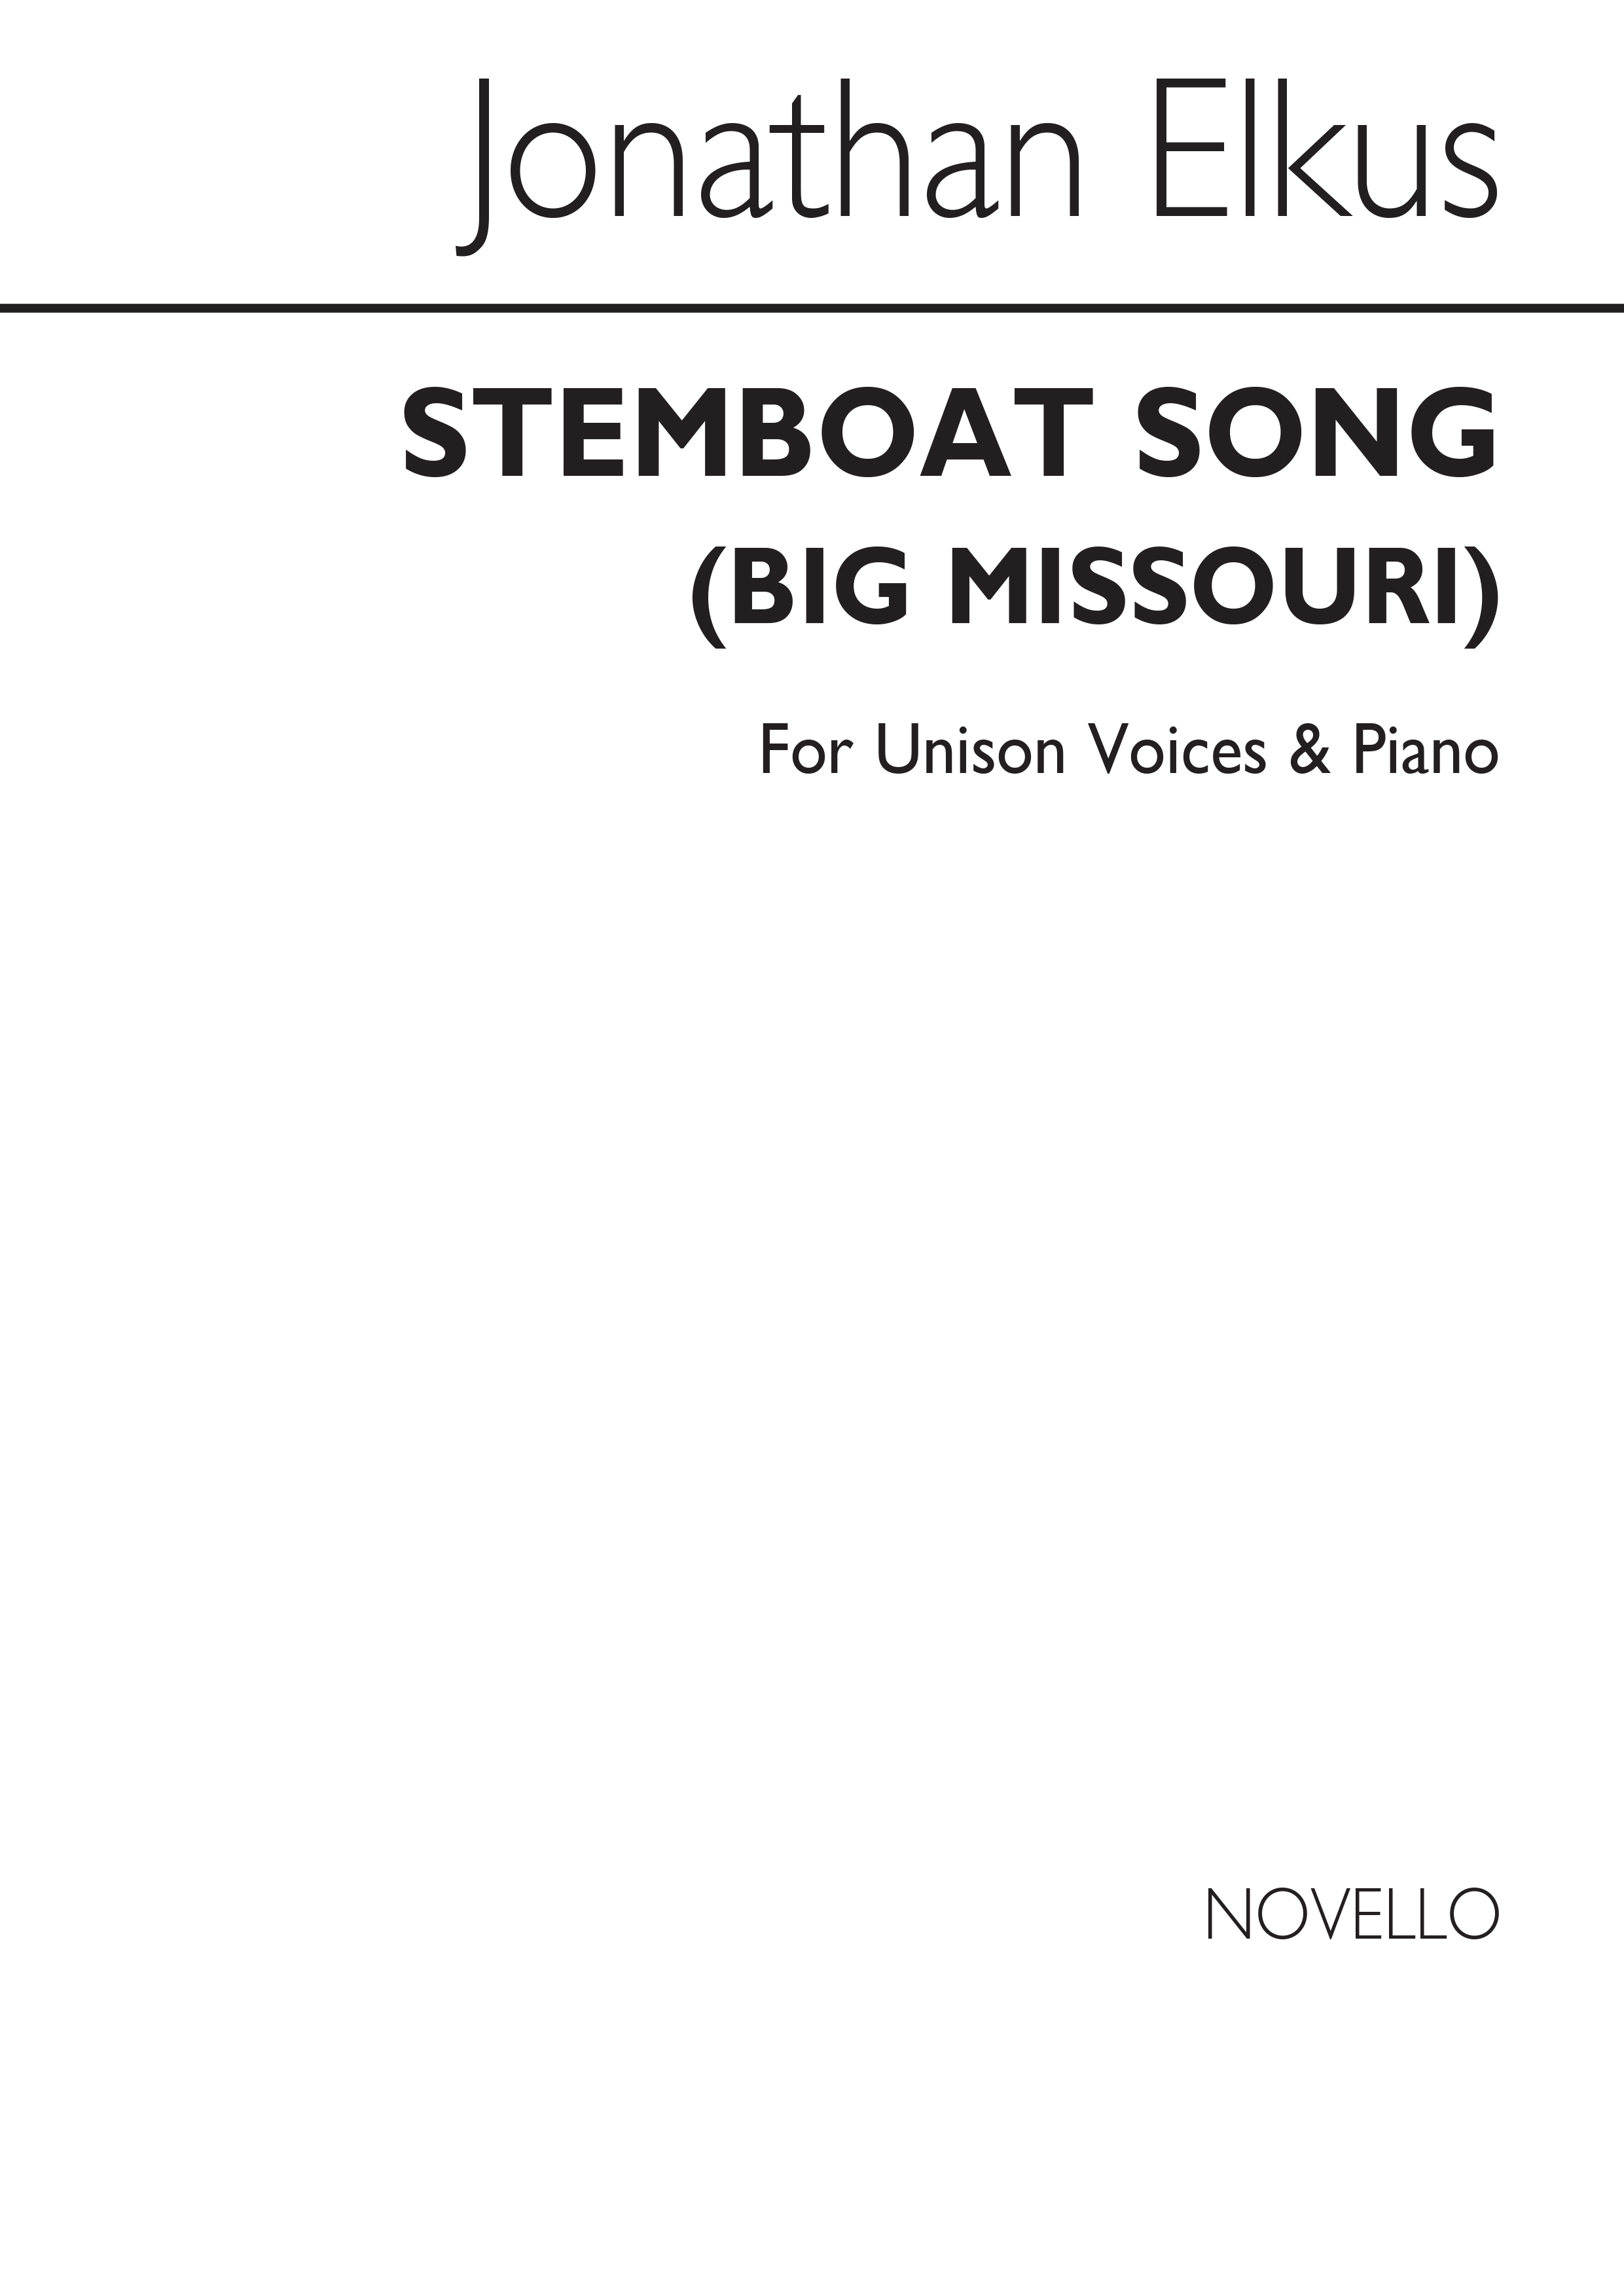 Jonathan Elkus: Steamboat Song from 'Big Missouri': Voice: Vocal Score